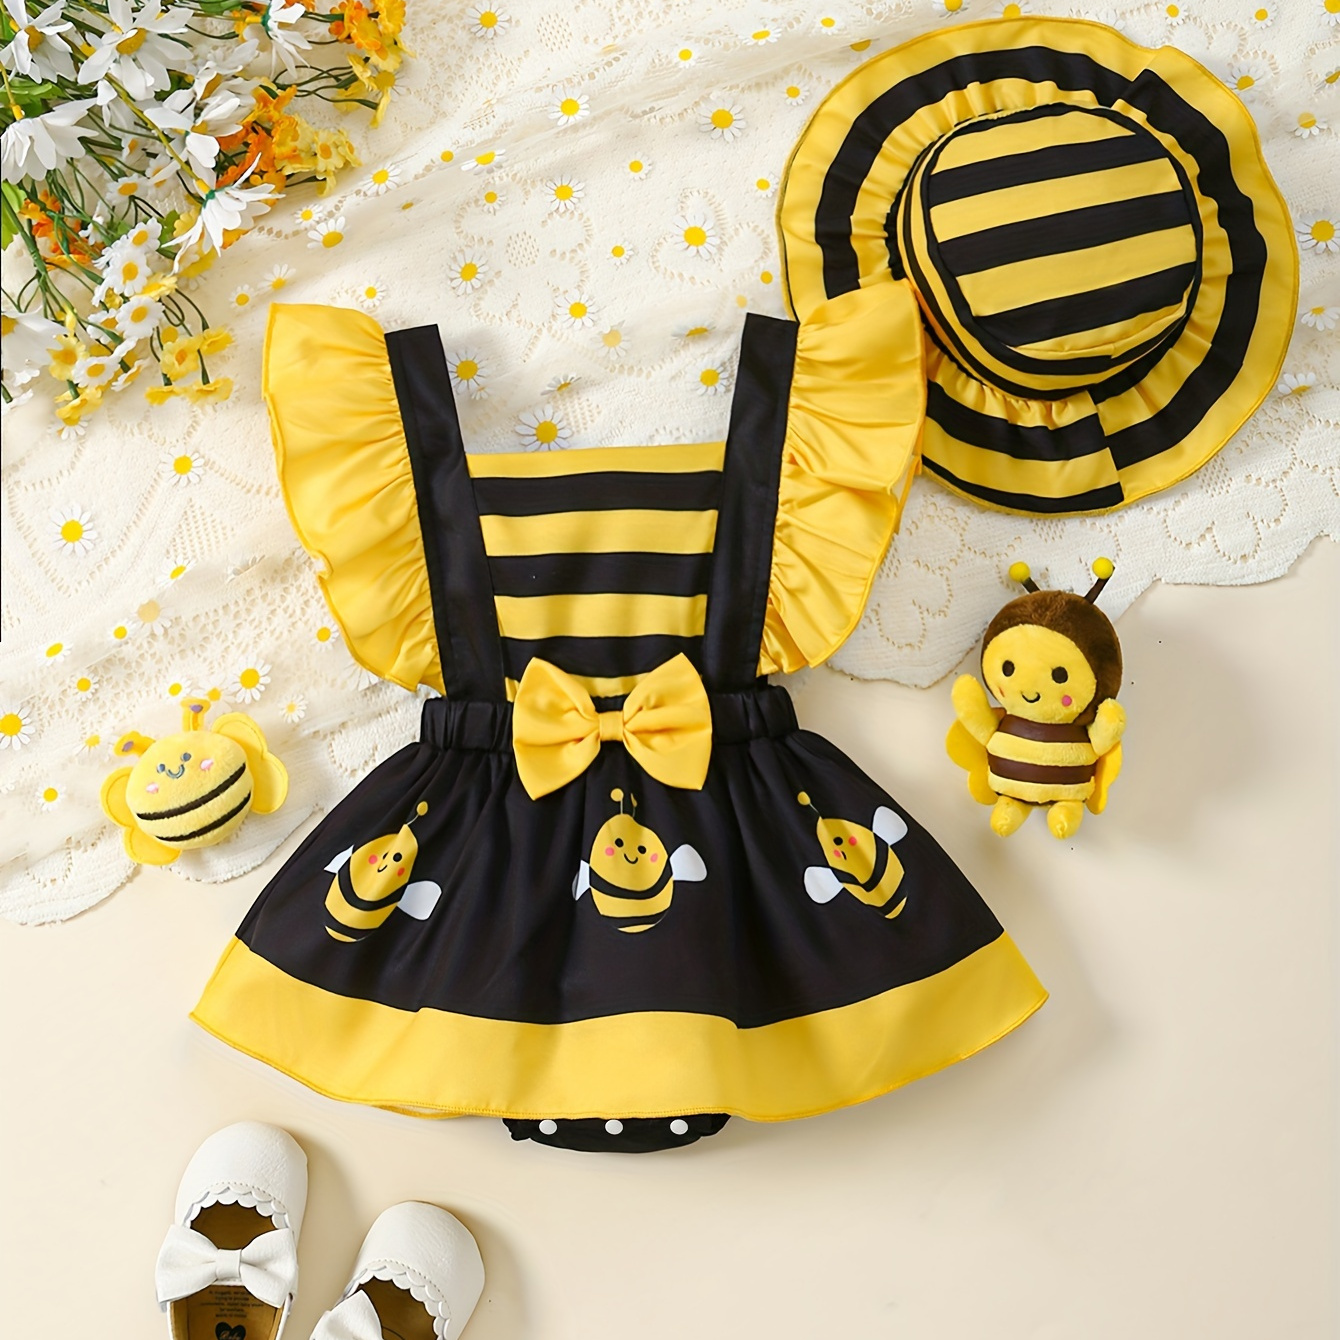 

Baby's Cute Little Bee Print Triangle Bodysuit & Color Clash Hat, Comfy Trendy Cap Sleeve Romper Dress, Toddler & Infant Girl's Onesie For Summer, As Gift